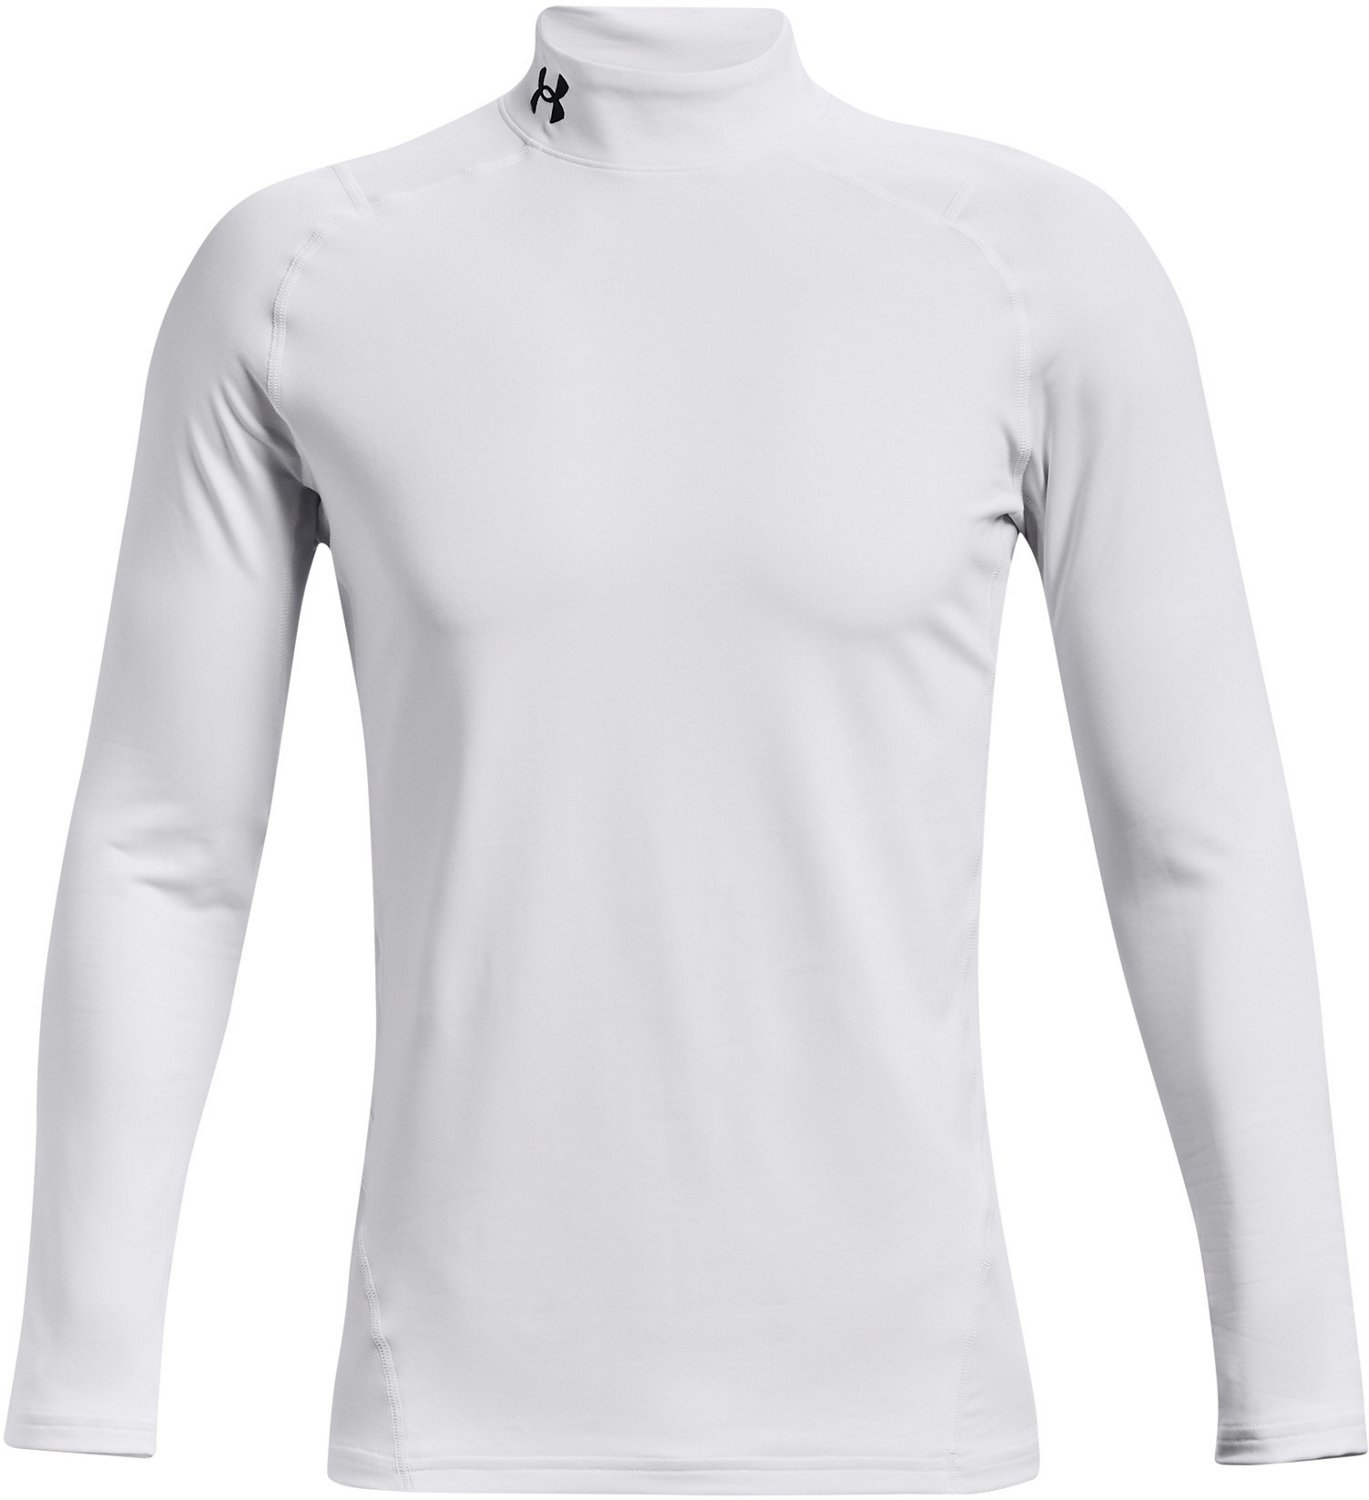 Under Armour Men's CG Armour Fitted Mock Long Sleeve Top